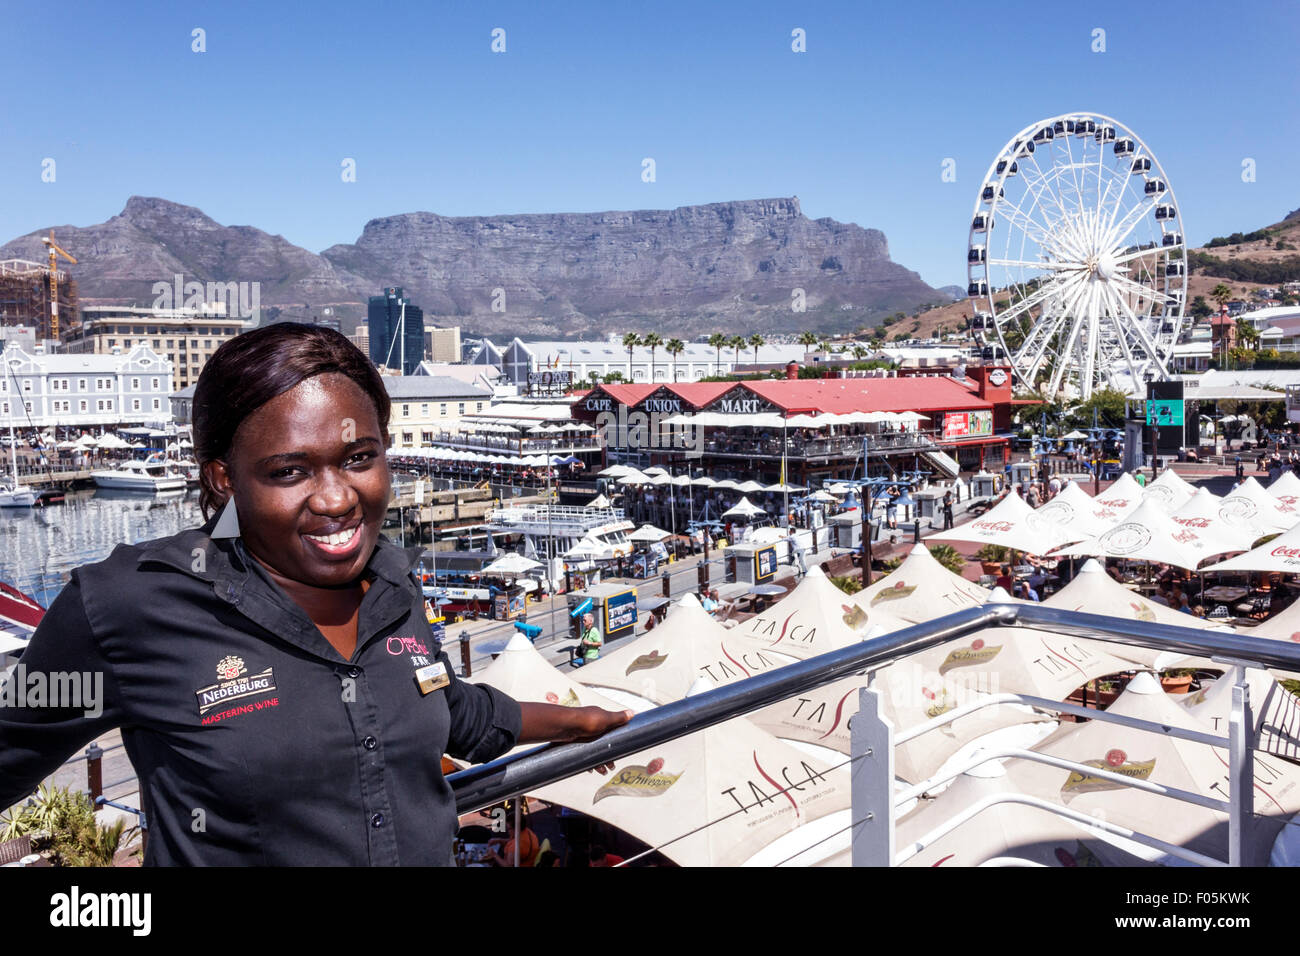 Cape Town South Africa,V & A Victoria Alfred Waterfront,Table Bay Harbour,harbor,Table Mountain,Cape Wheel,Ferris,Cape Union Mart,Black Afro American, Stock Photo